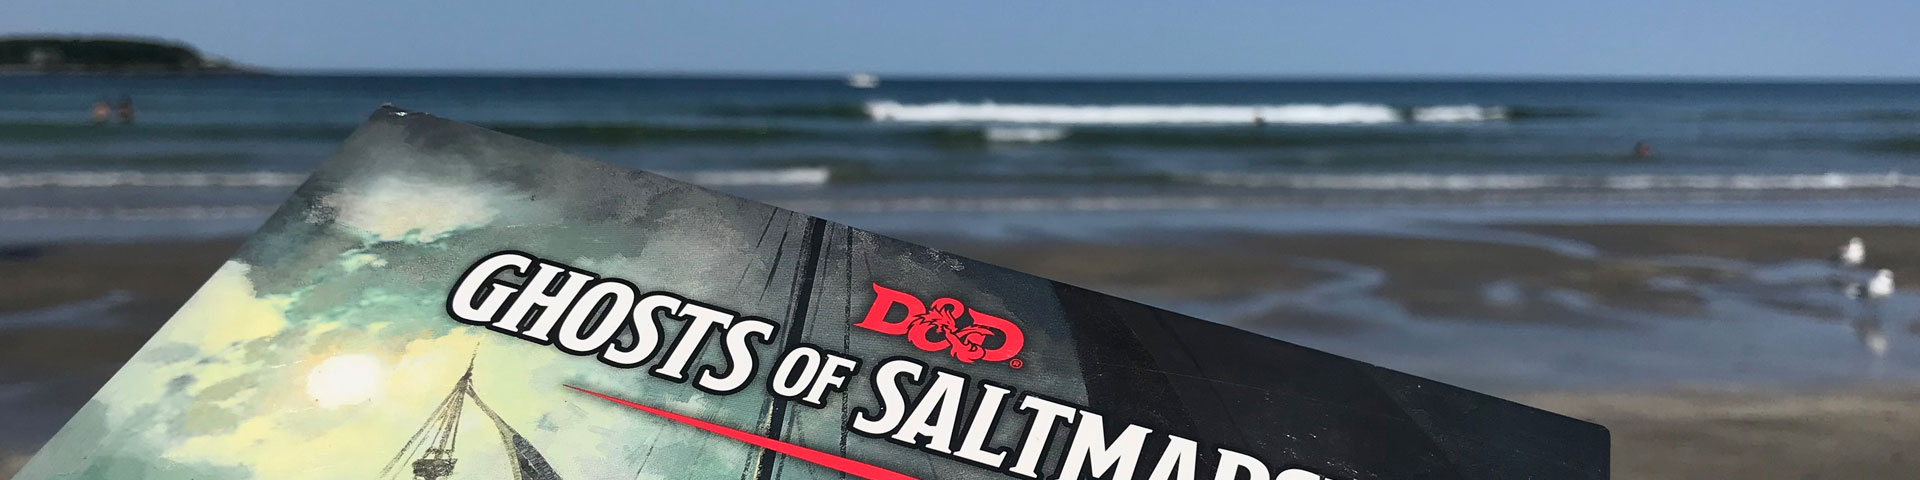 The cover of the Ghosts of the Saltmarsh RPG book appears in front of the ocean.